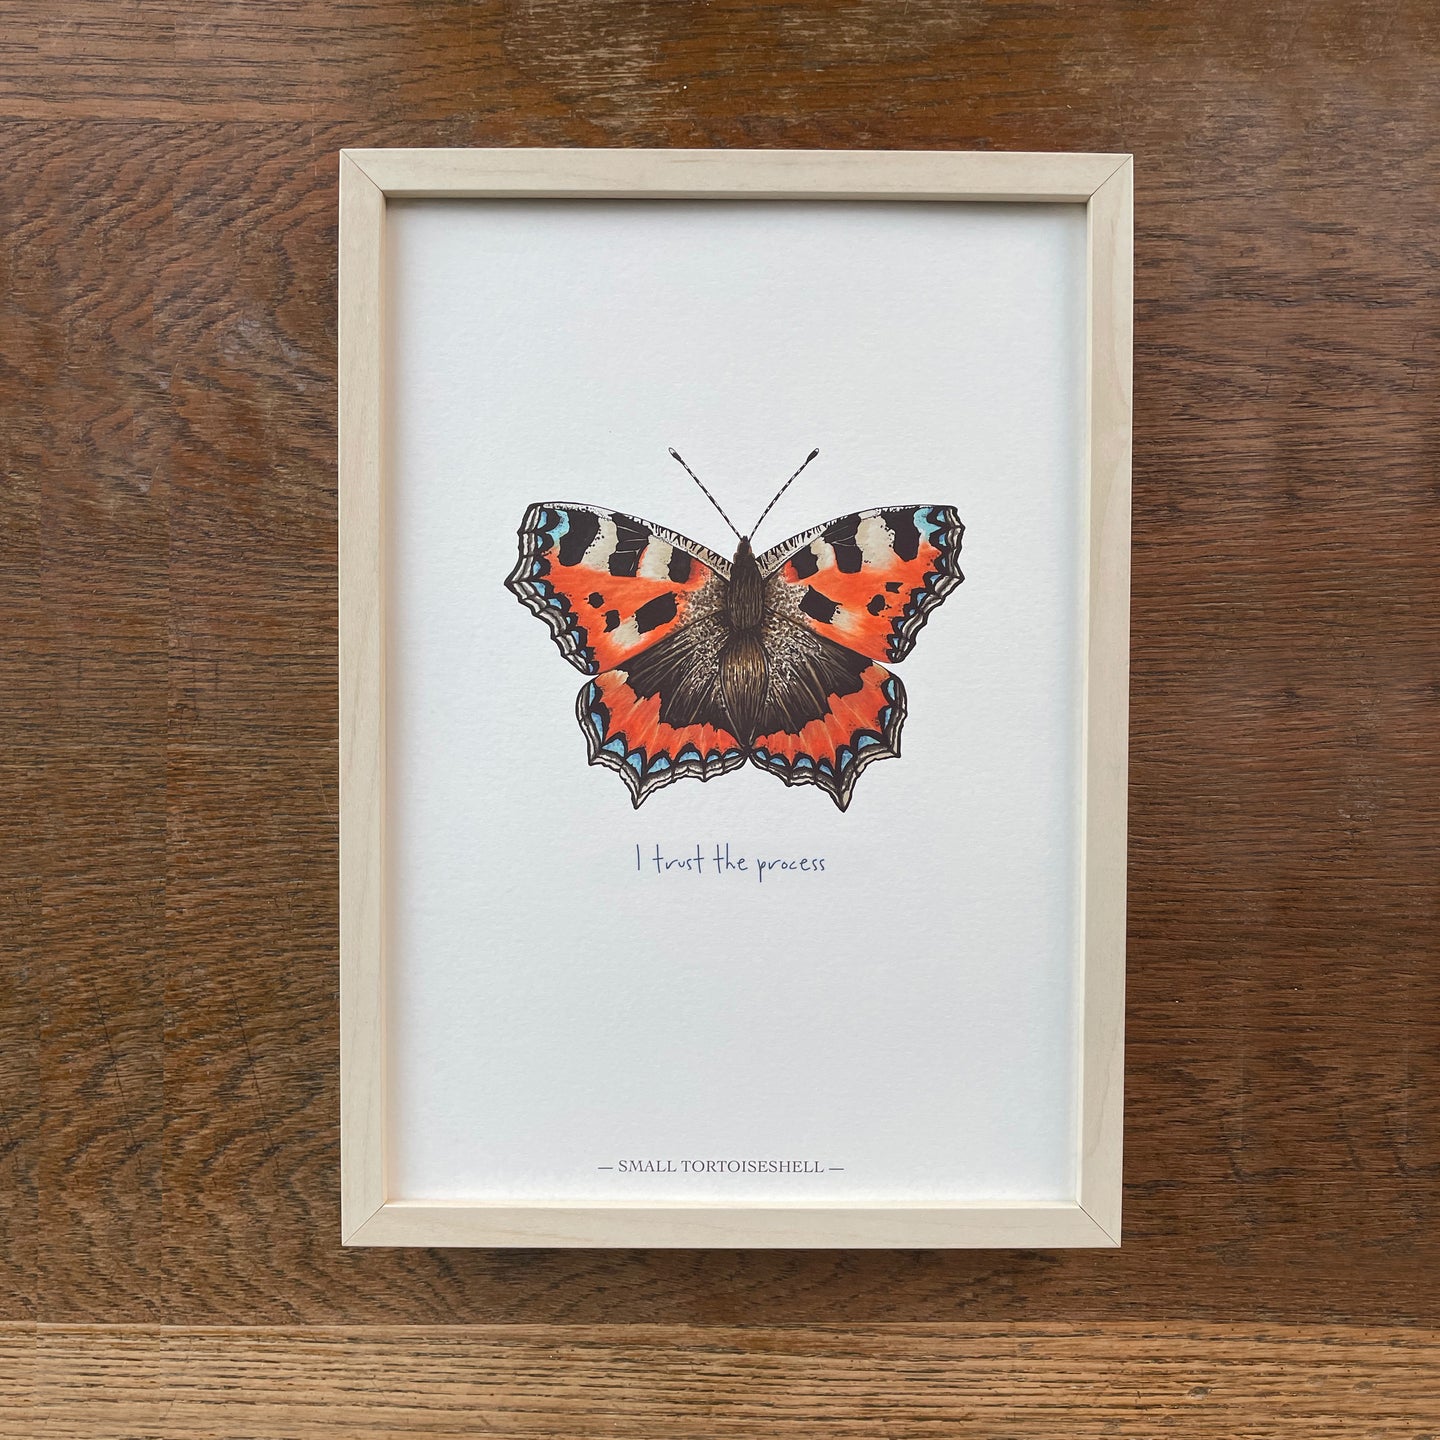 Personalised Small Tortoiseshell illustrated butterfly print